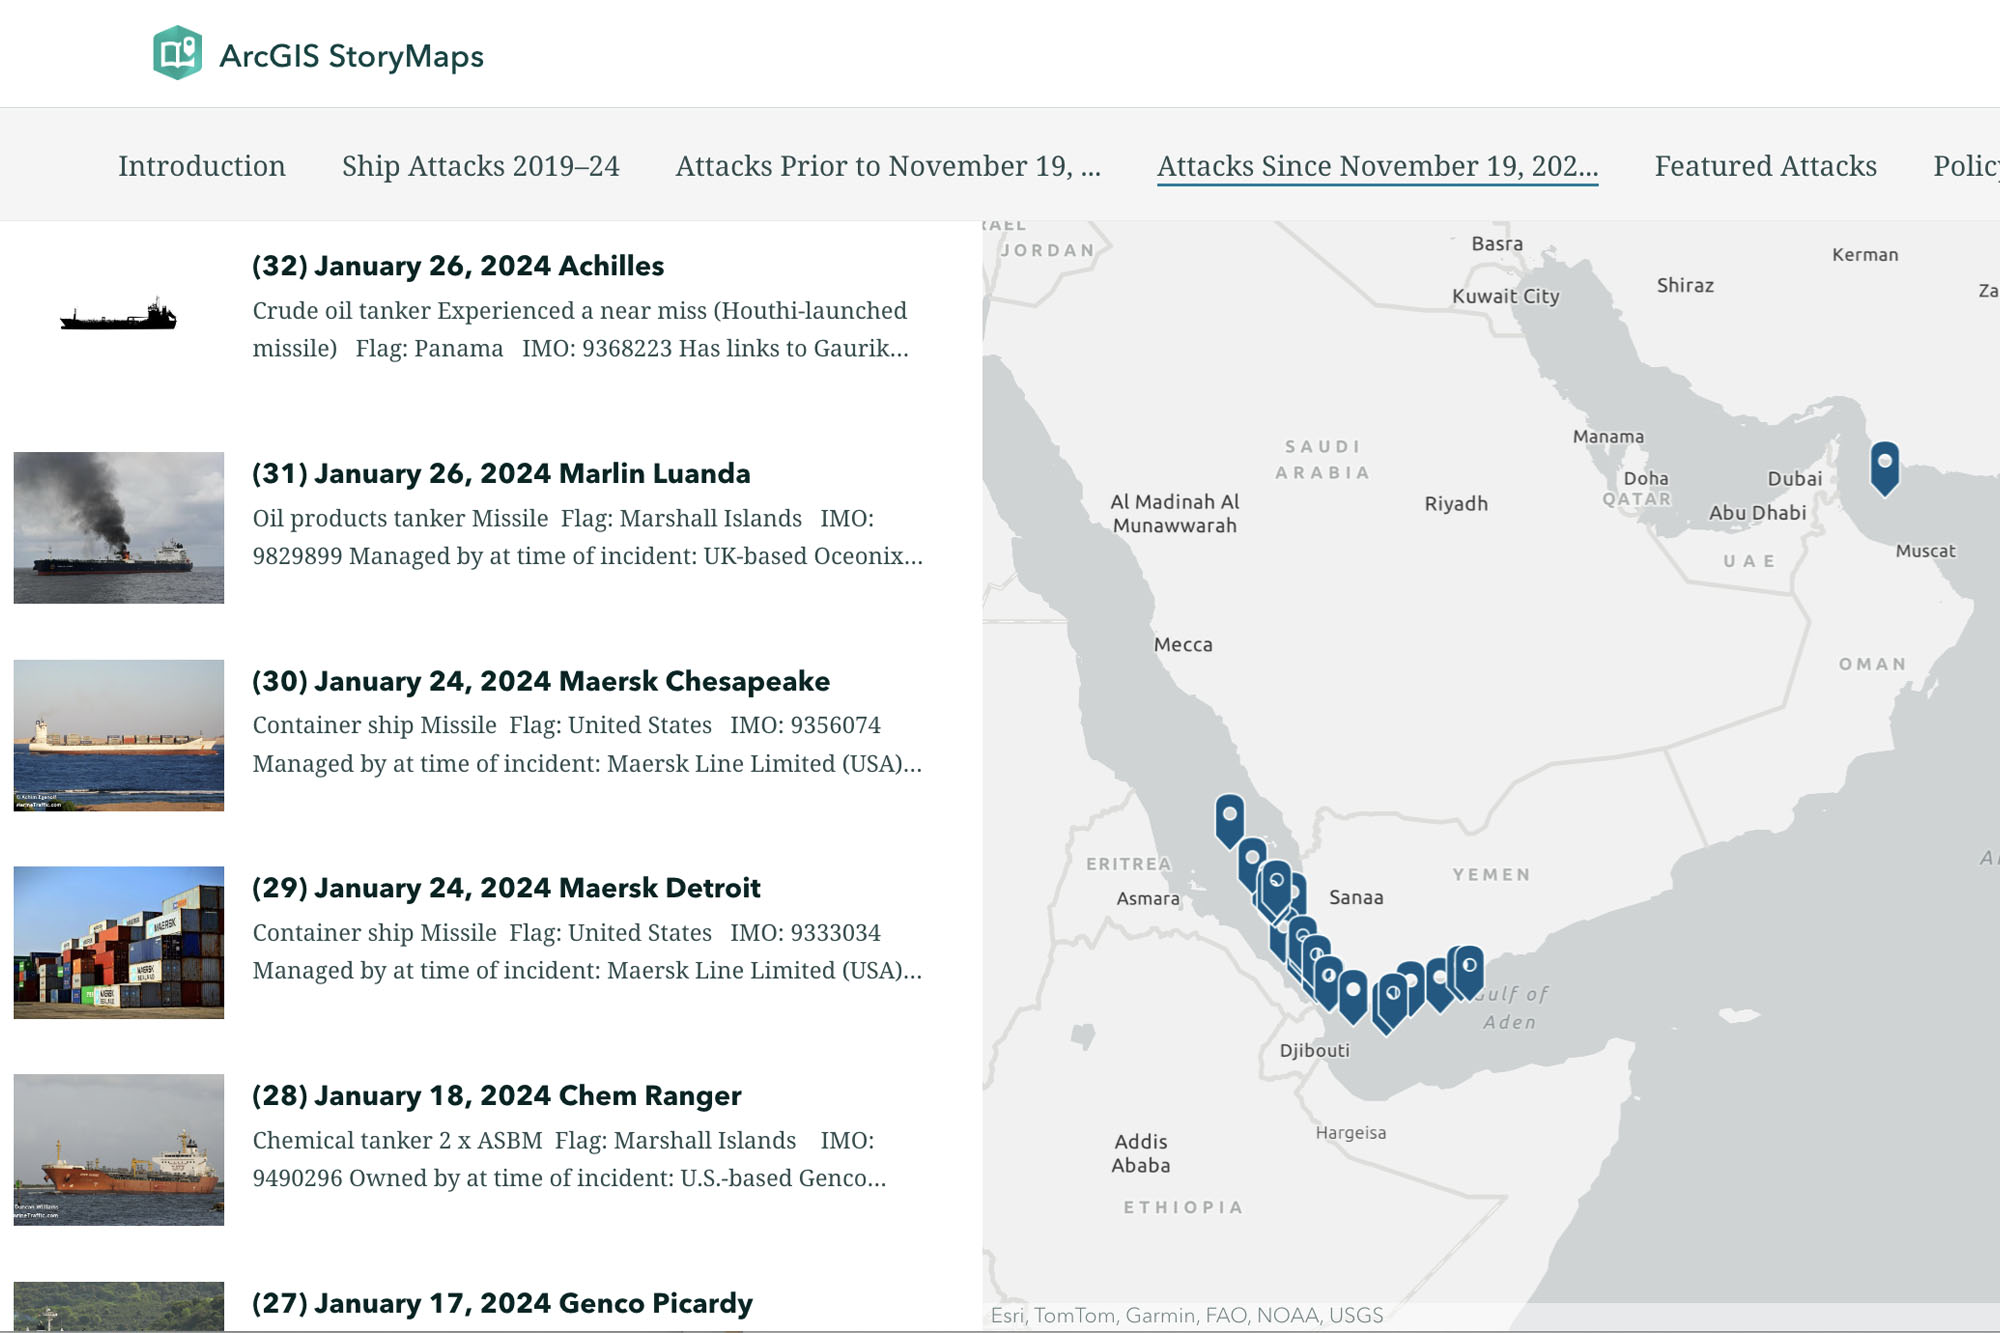 Ready go to ... https://www.washingtoninstitute.org/policy-analysis/tracking-maritime-attacks-middle-east-2019 [ Tracking Maritime Attacks in the Middle East Since 2019]